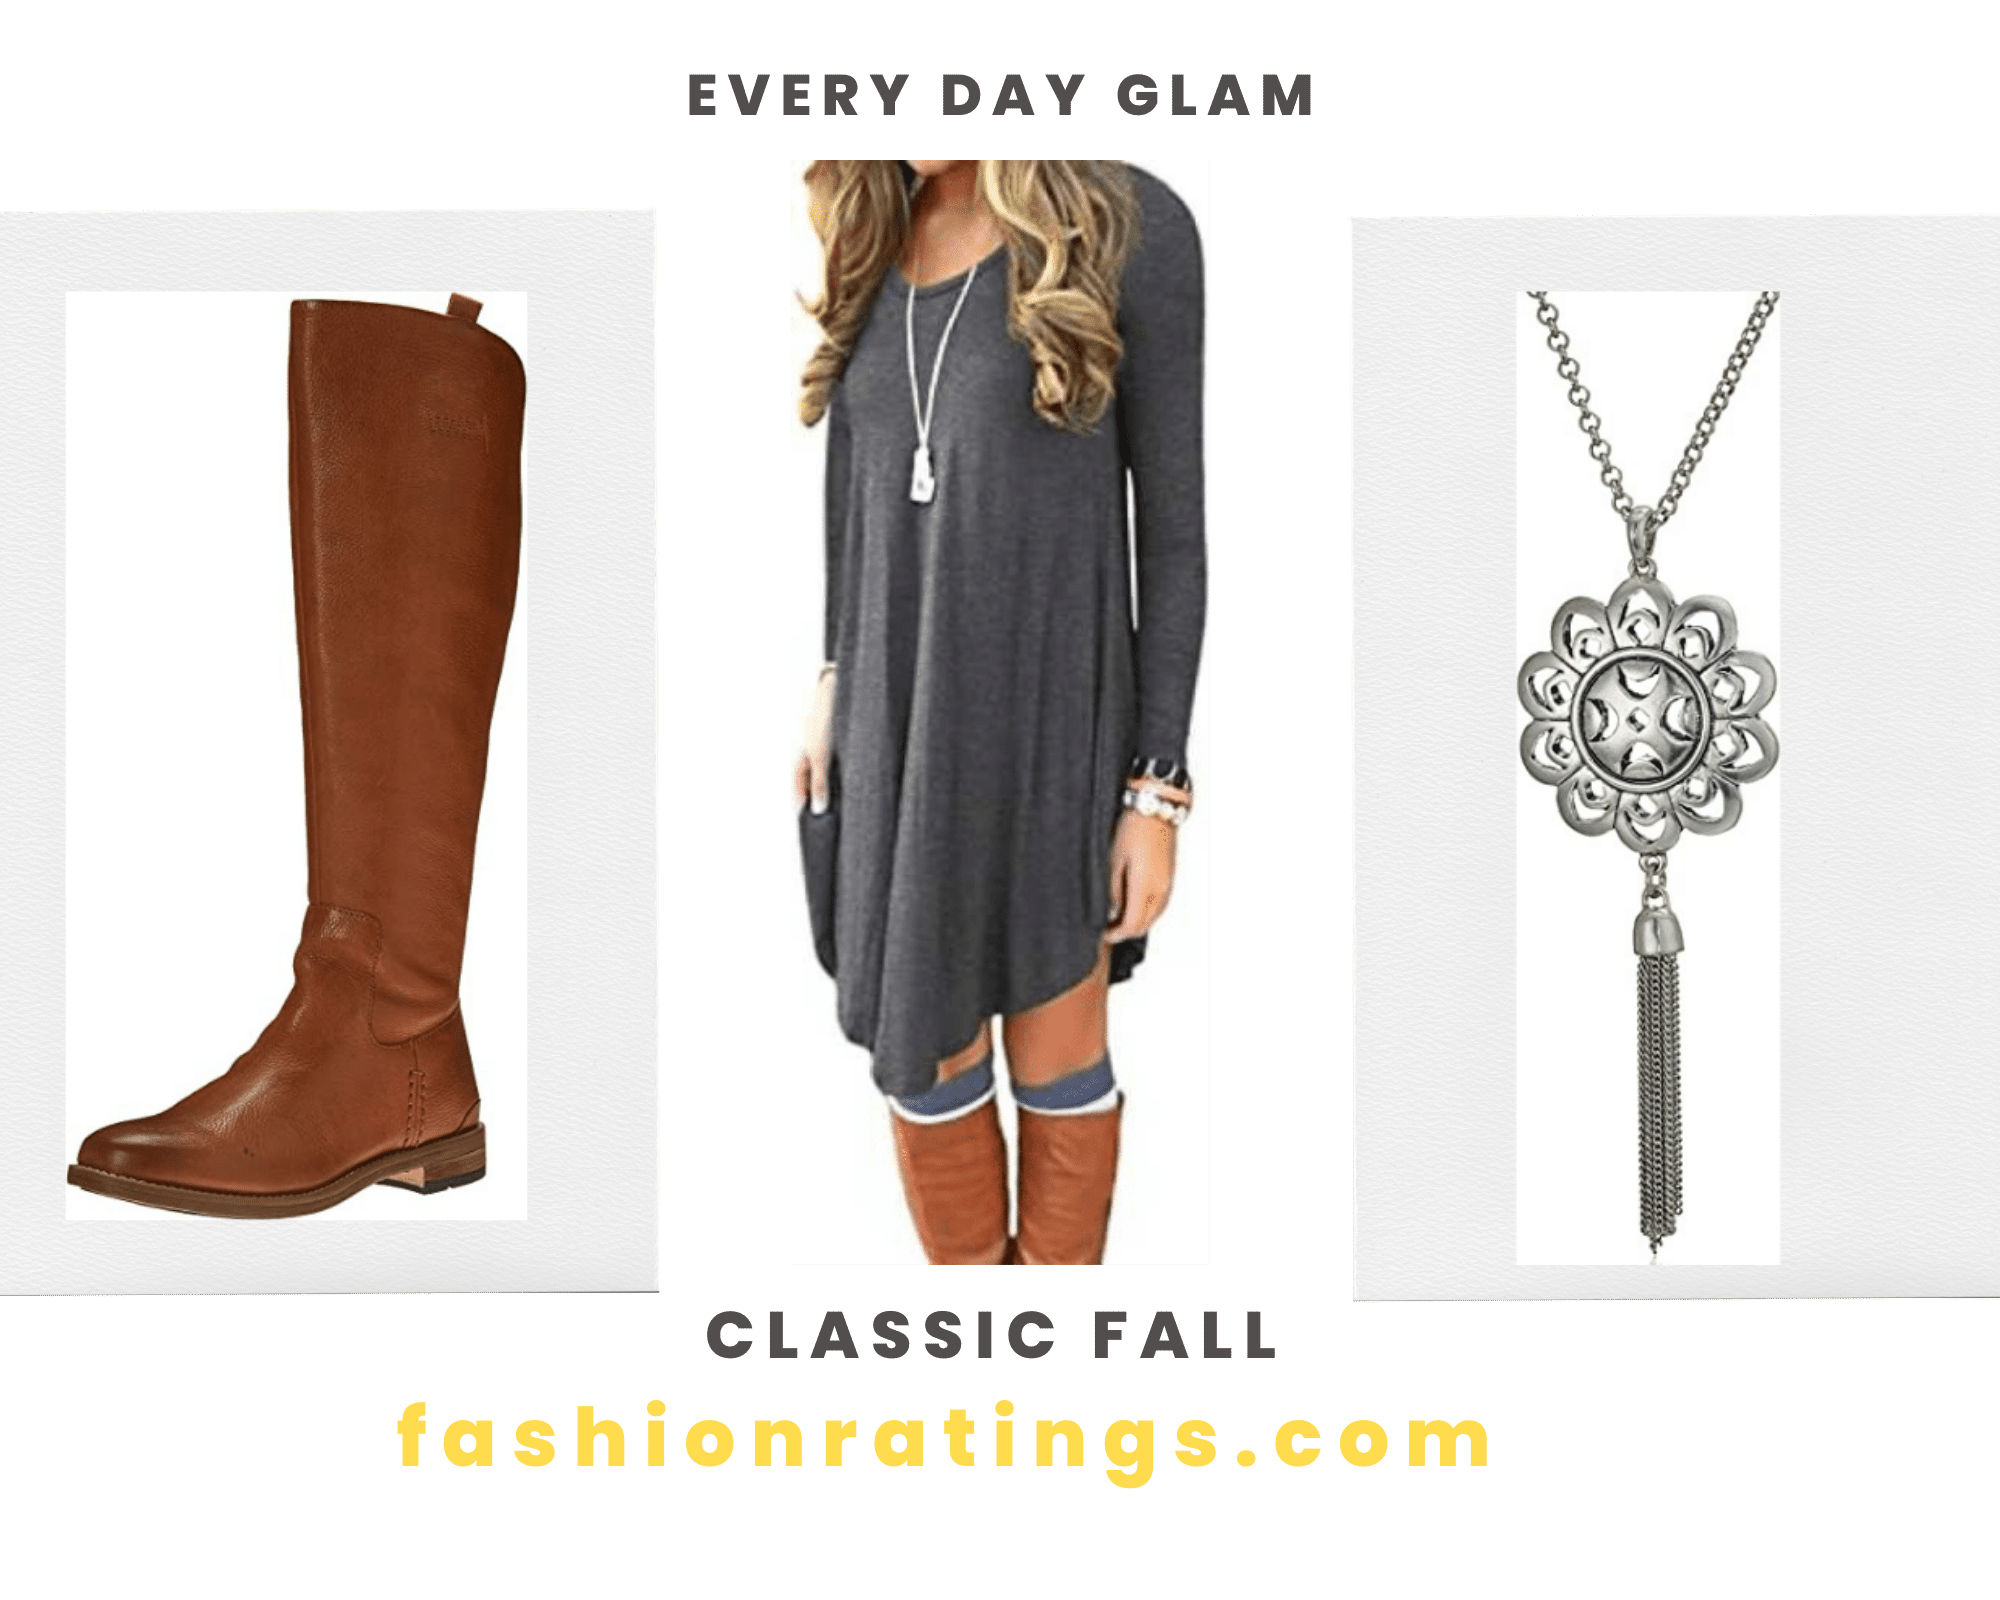 Knee High Boots TShirt Dress and Lariat Necklace